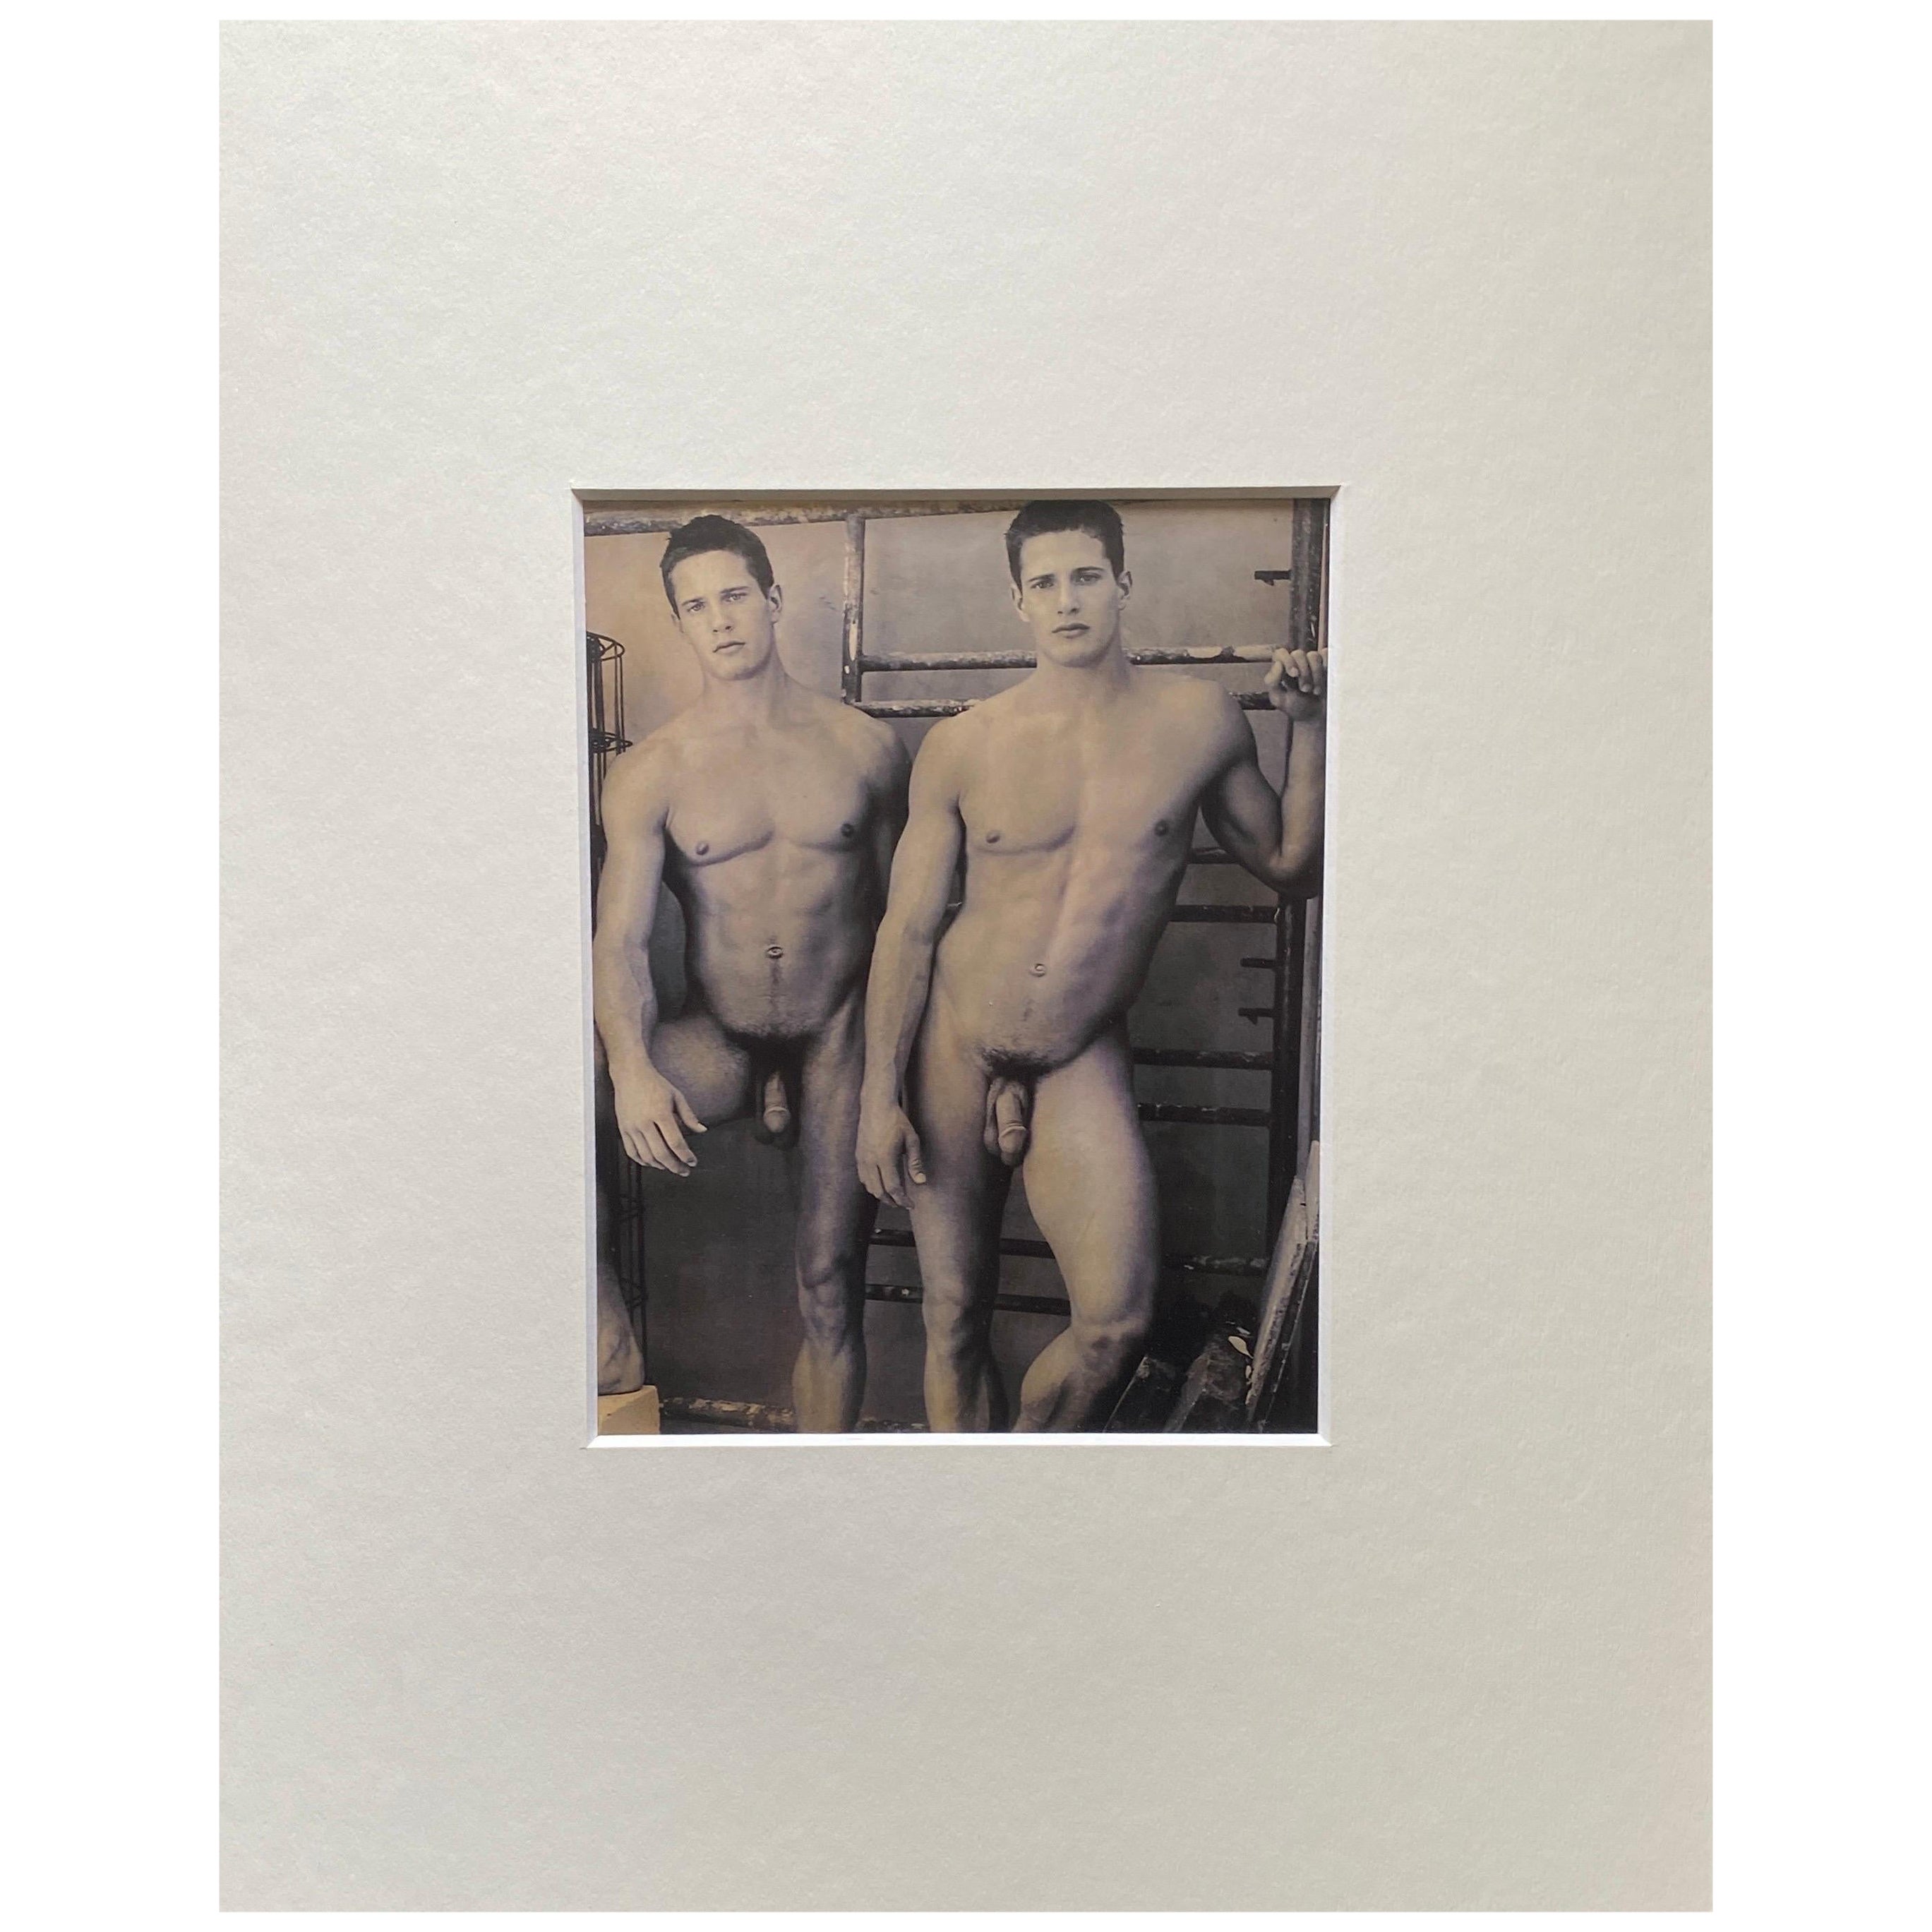 Bruce Weber Print of The Carlson Twins, 2000, Hand-Toned, Matted Male Nude #3